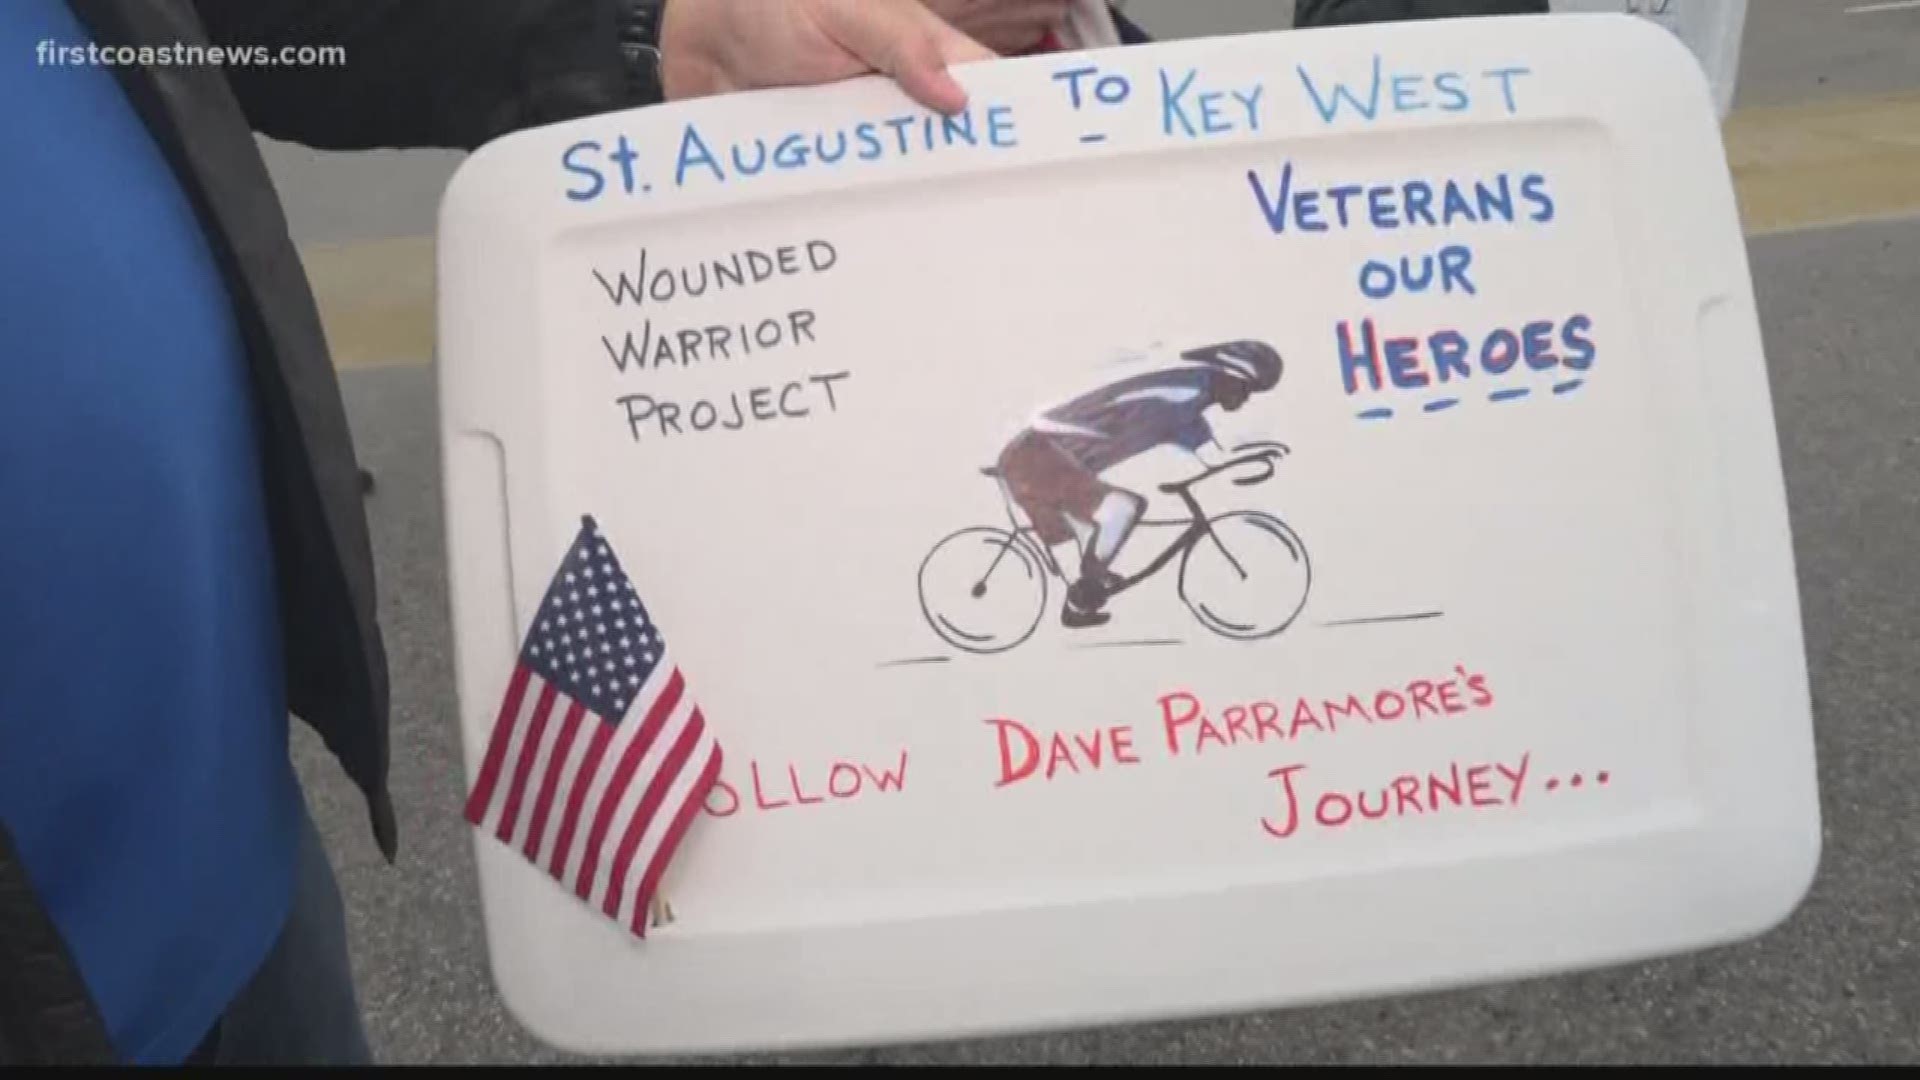 Dave Parramore's journey will last 11 days, covering around 500 miles. The money raised will be for the Wounded Warrior Project's veterans workforce program.